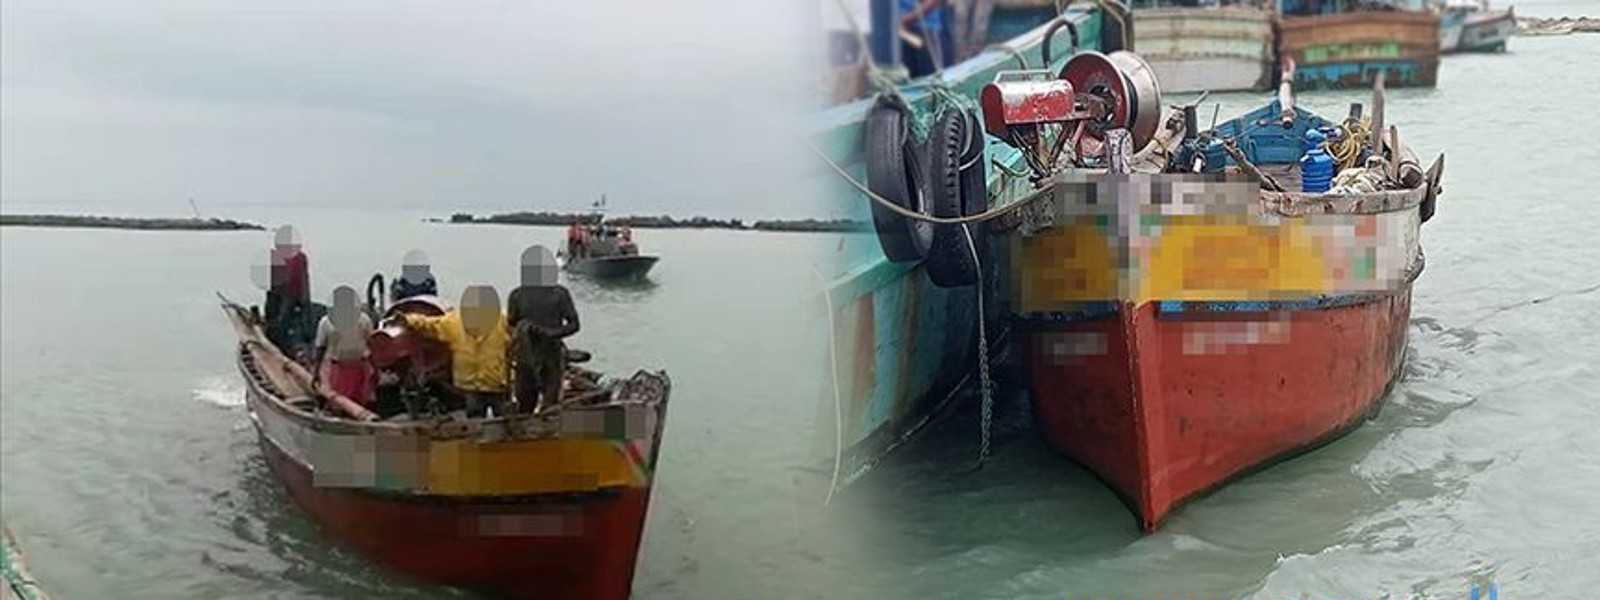 Six Indian fishermen remanded until March 4th